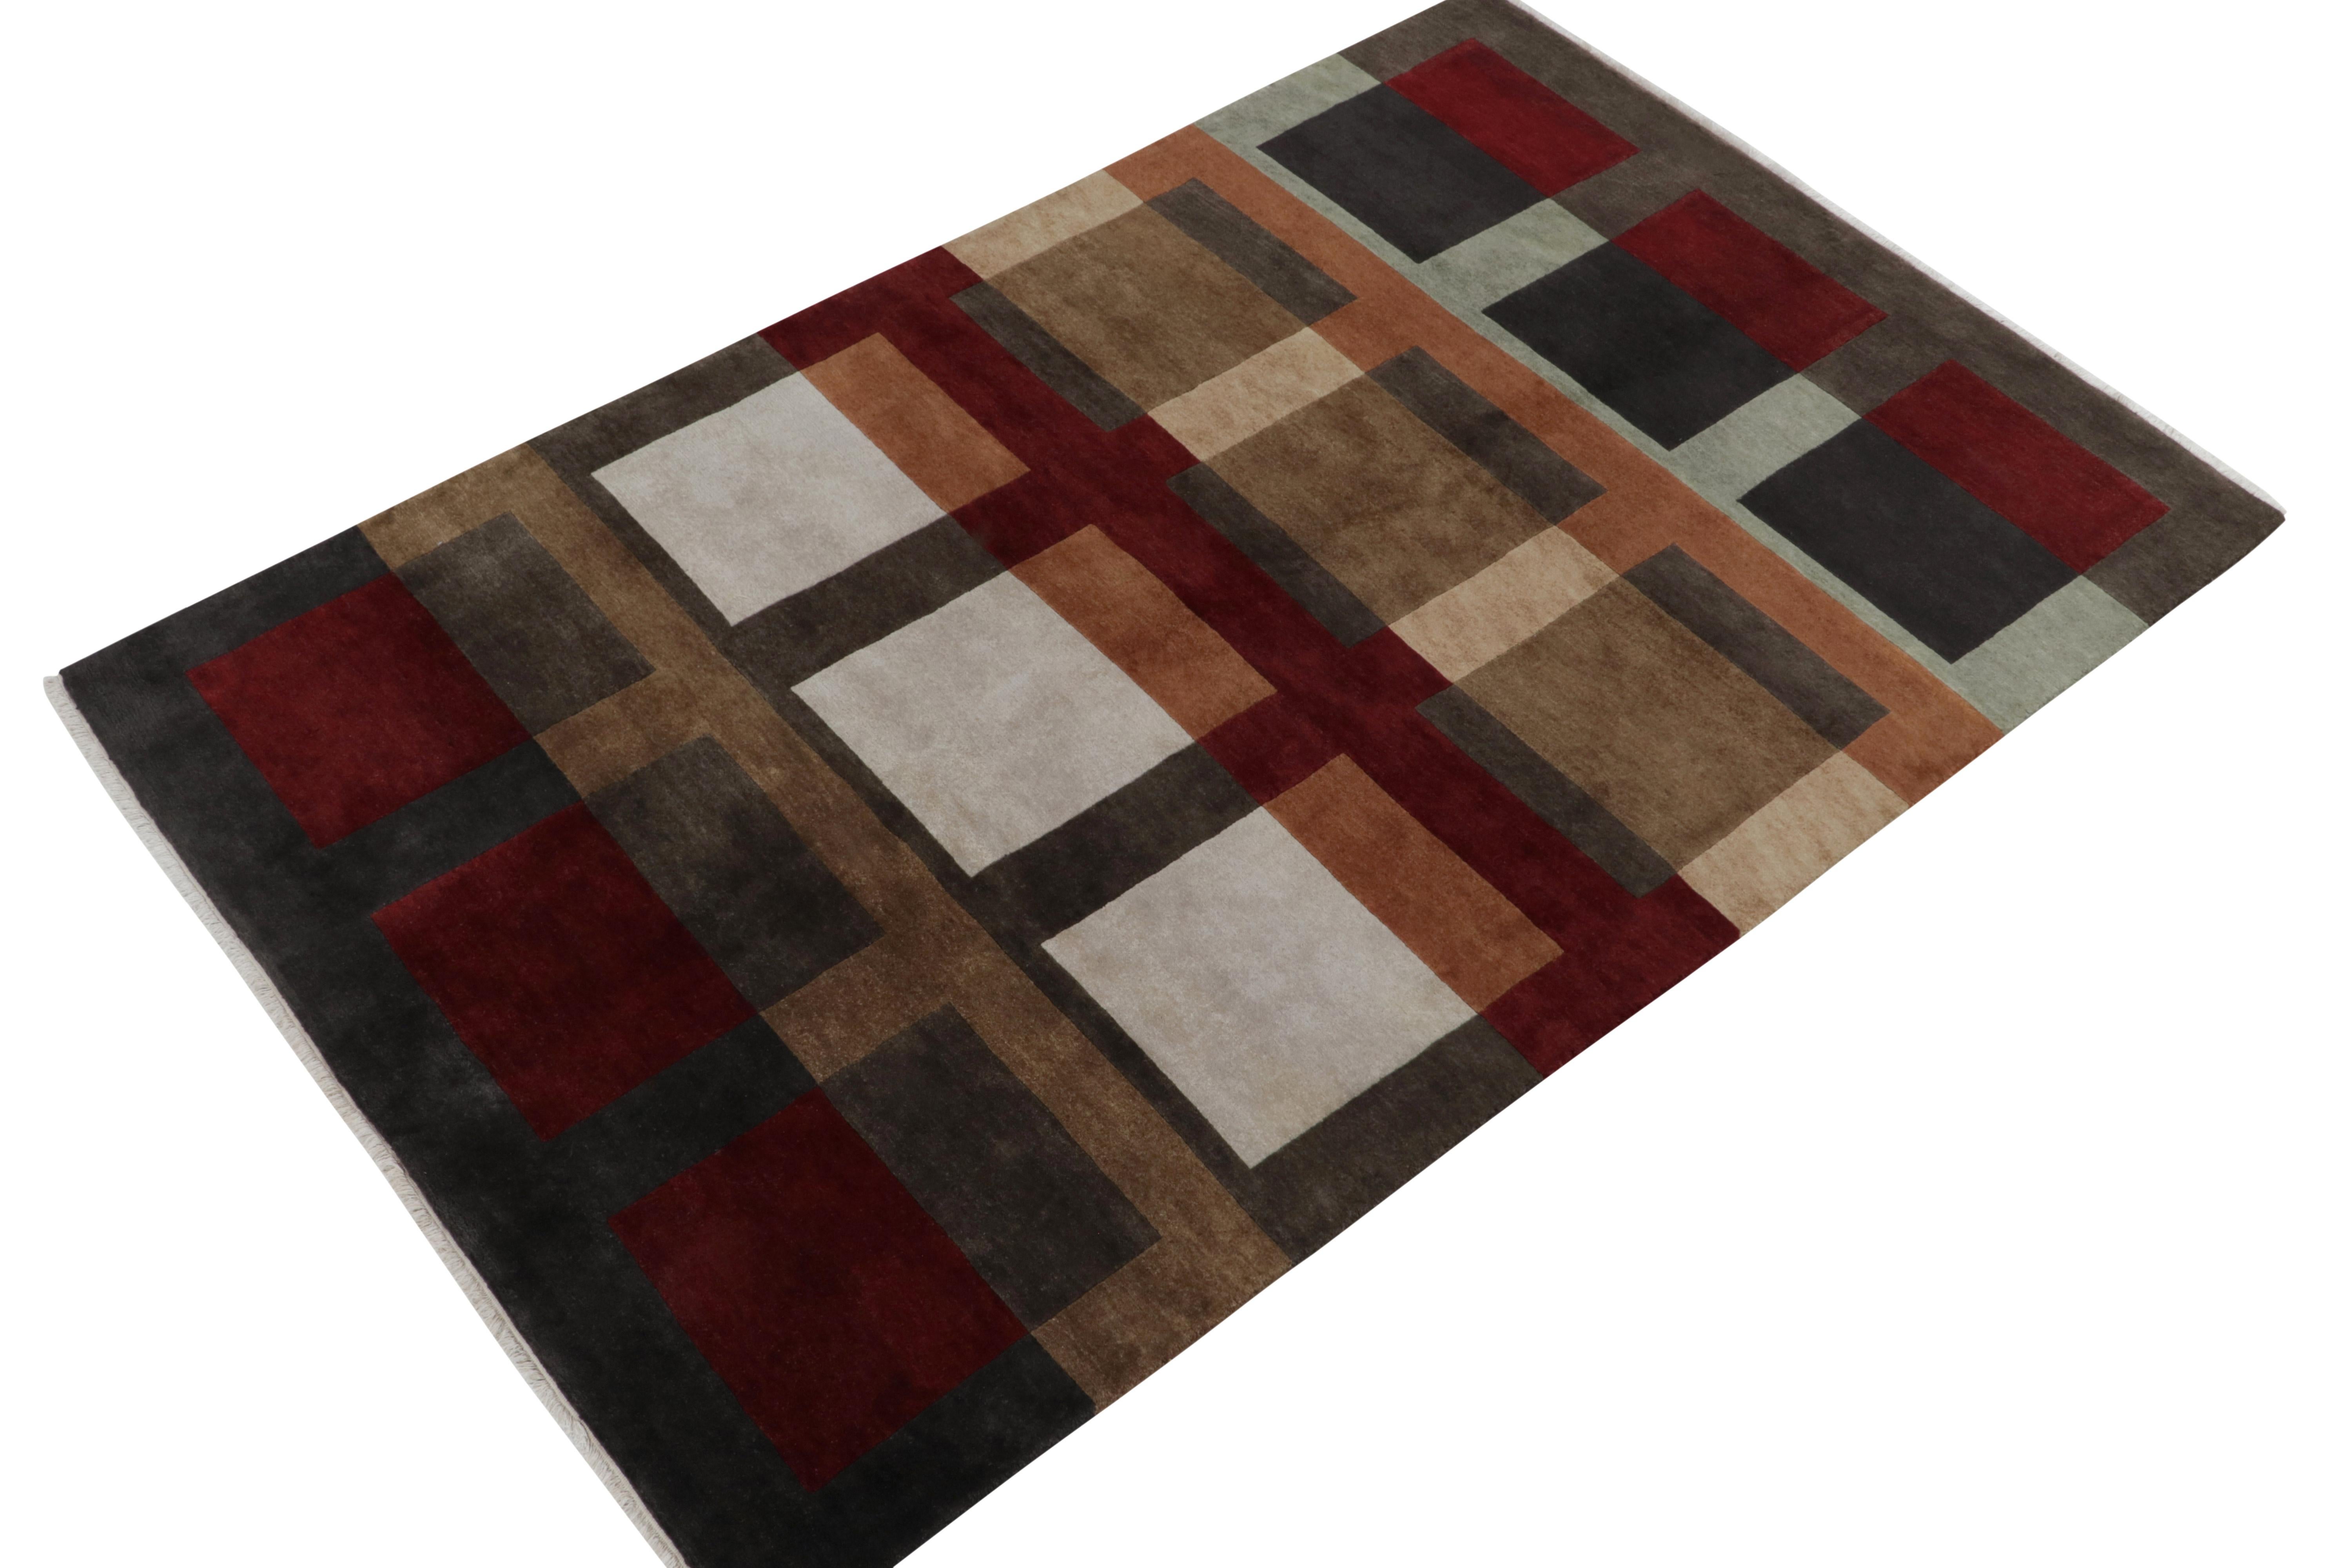 From Rug & Kilim’s bold modern works, a 6x9 hand-knotted wool piece inspired by Cubist Art Deco rugs. This particular carpet showcases a refined geometric pattern in gray and brown with red and blue, beautifully complemented by a natural sheen in